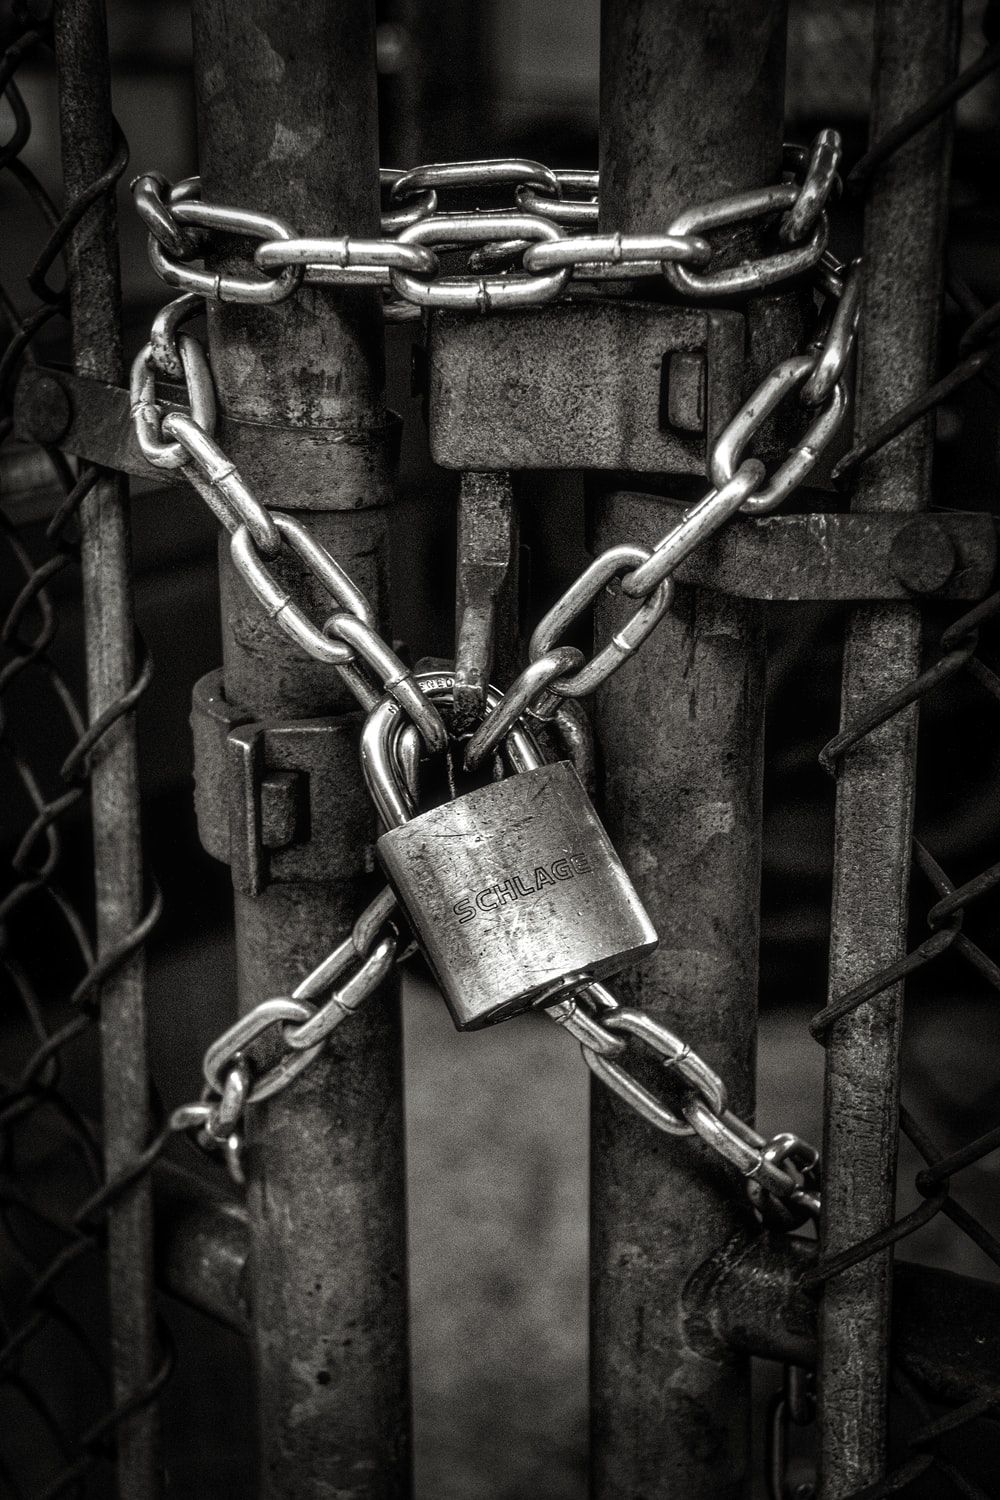 Lock Picture. Download Free Image